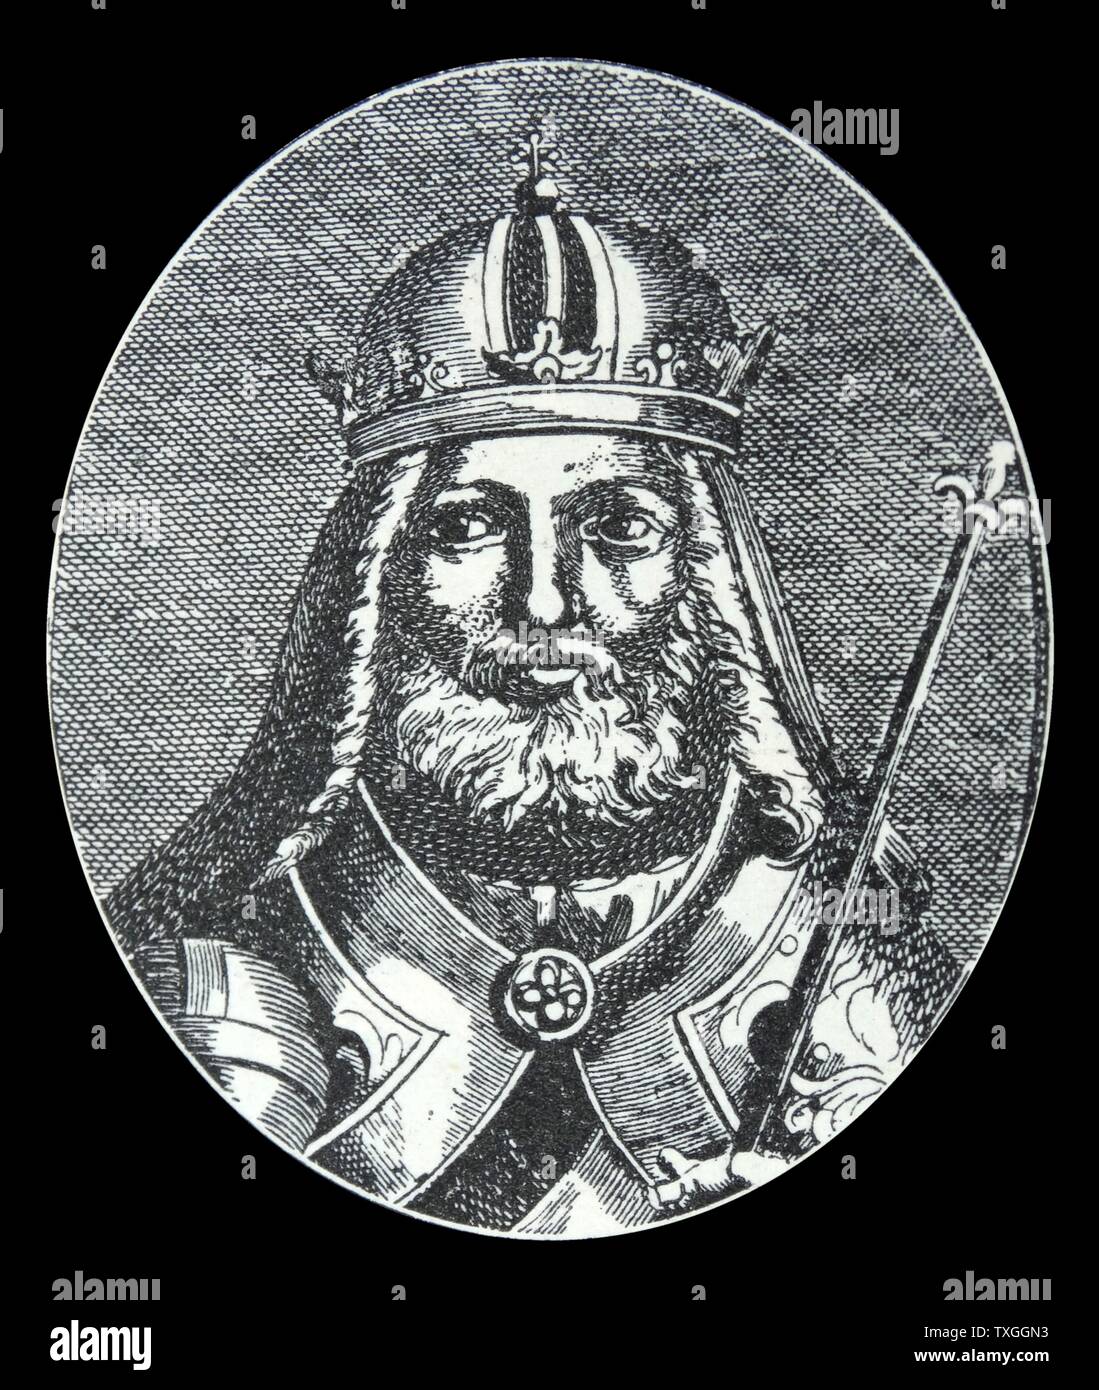 The Father of Bohemia. Charles IV, known as The Father of Bohemia for his immense service in driving his country's advance of power and prosperity. Stock Photo